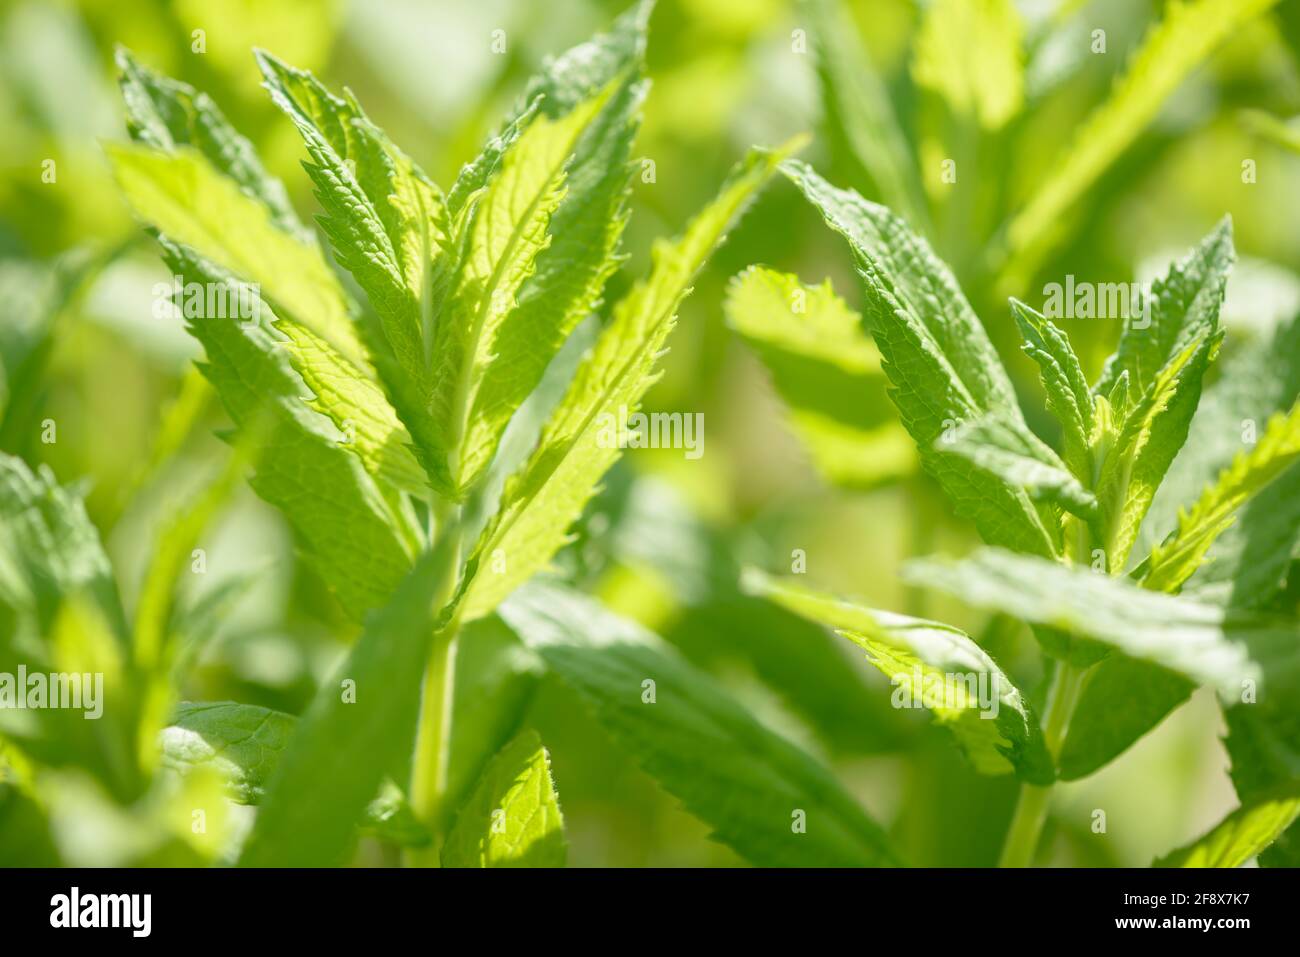 Fresh green organic mint growing in the garden. Plant used as an natural ingredient for food and drink. Raw peppermint leaves. Spearmint leaf. Stock Photo